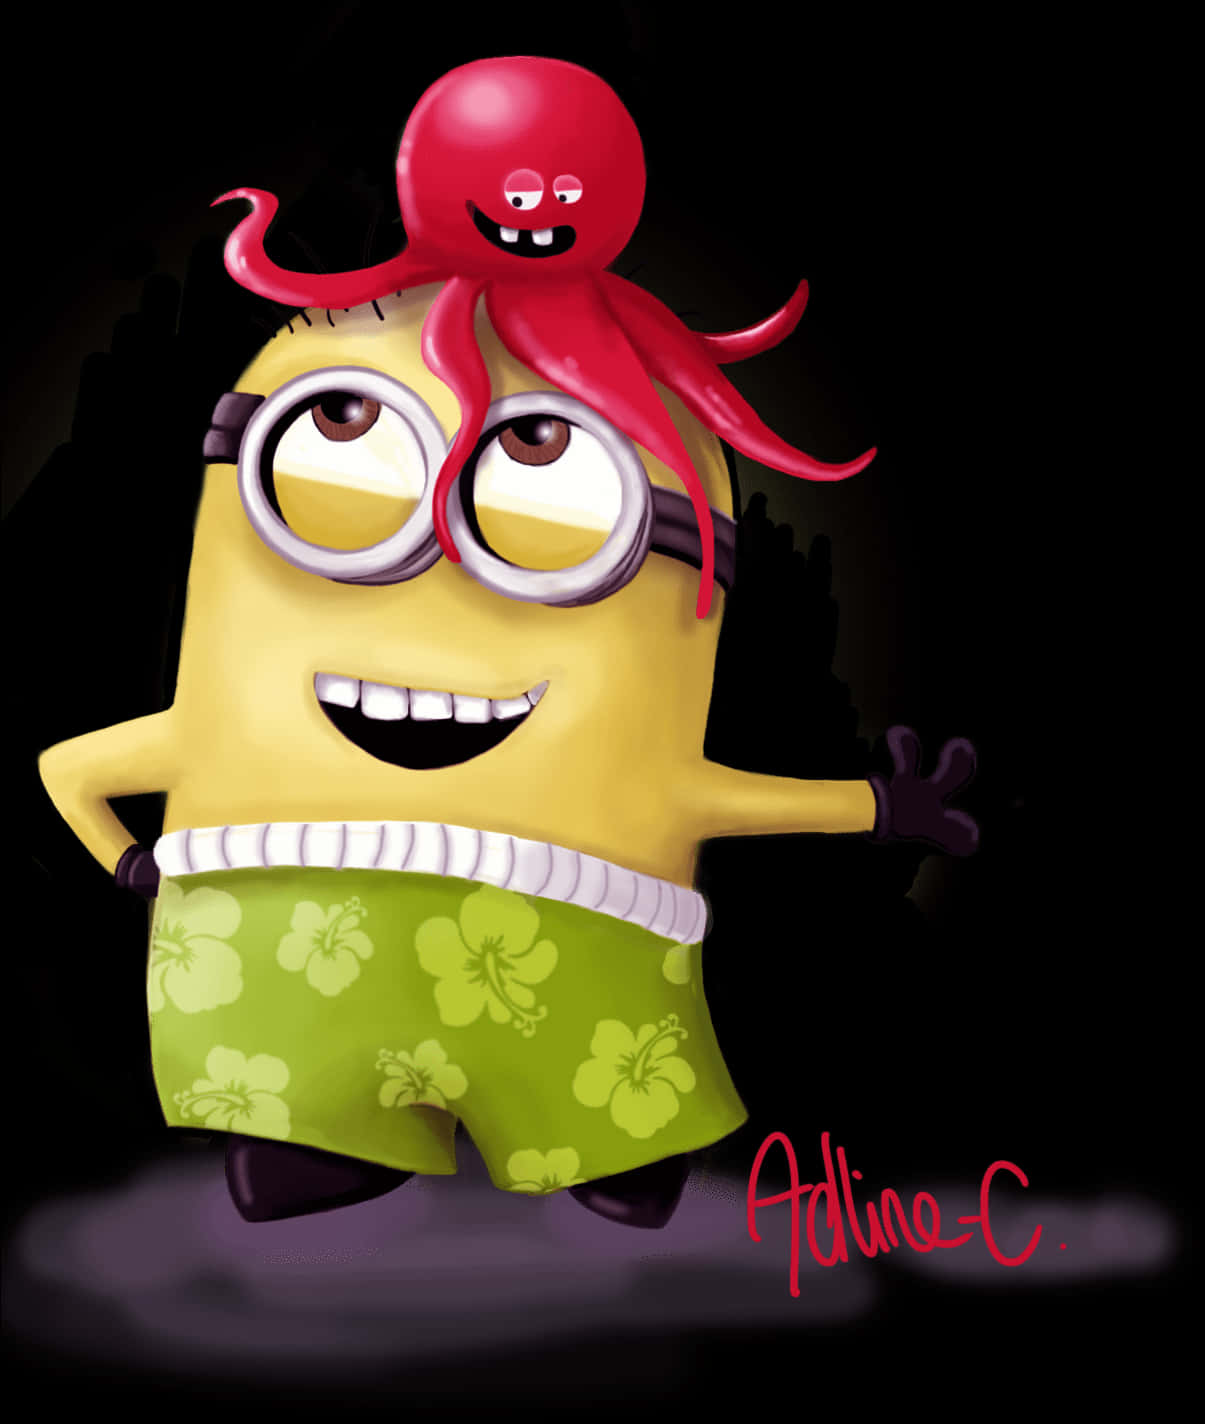 Minionwith Octopus Hat PNG image